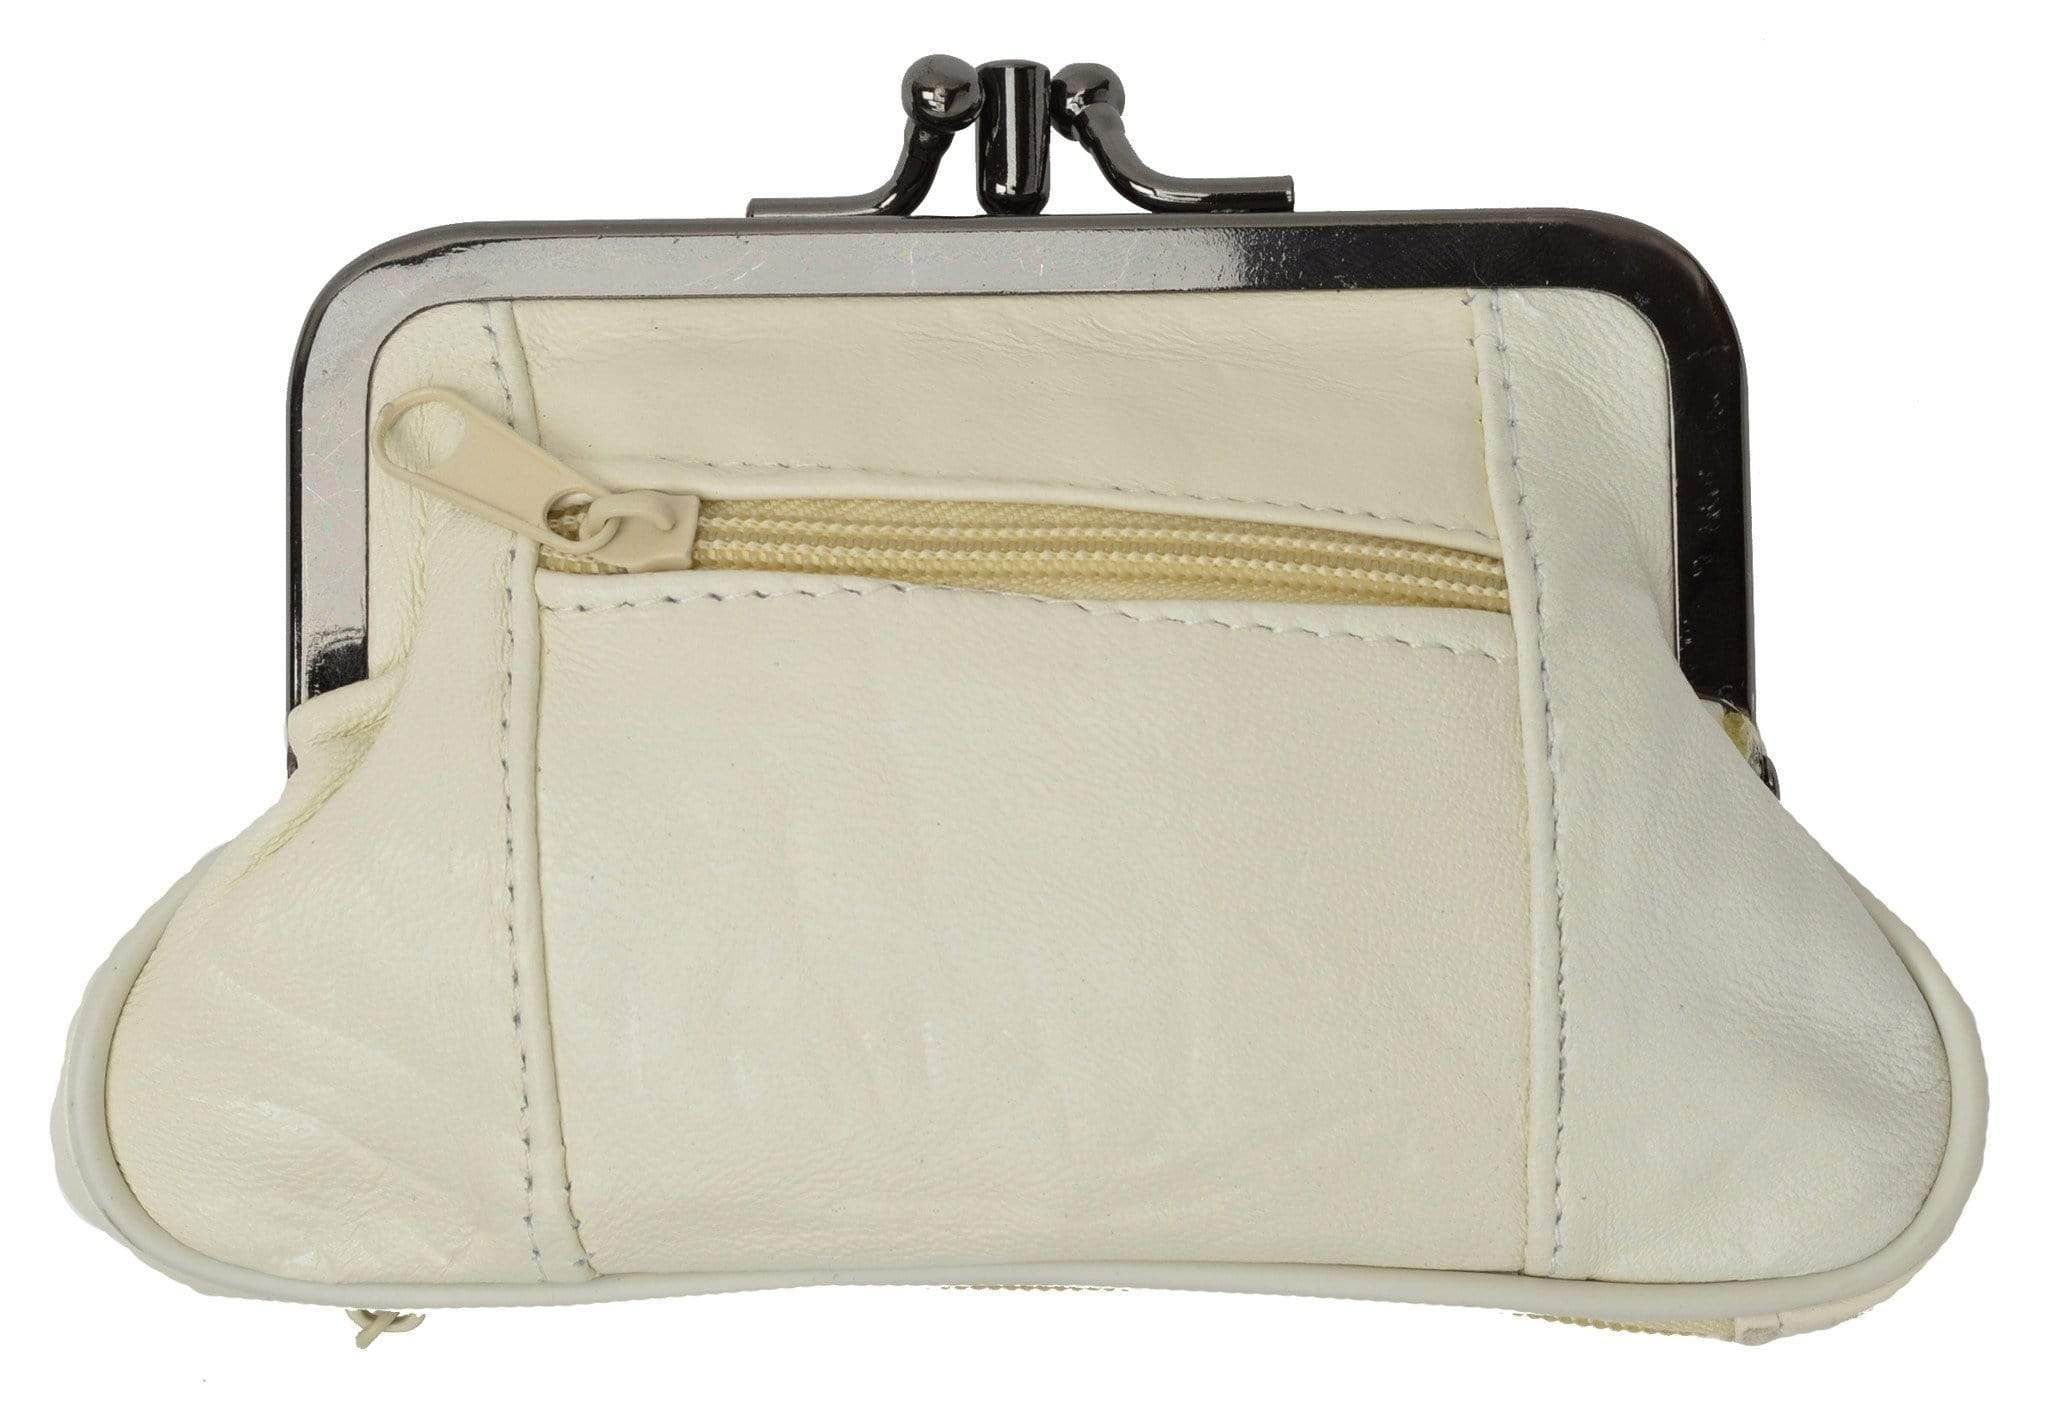 Genuine Leather Change Purse with Zipper Bottom Compartment 